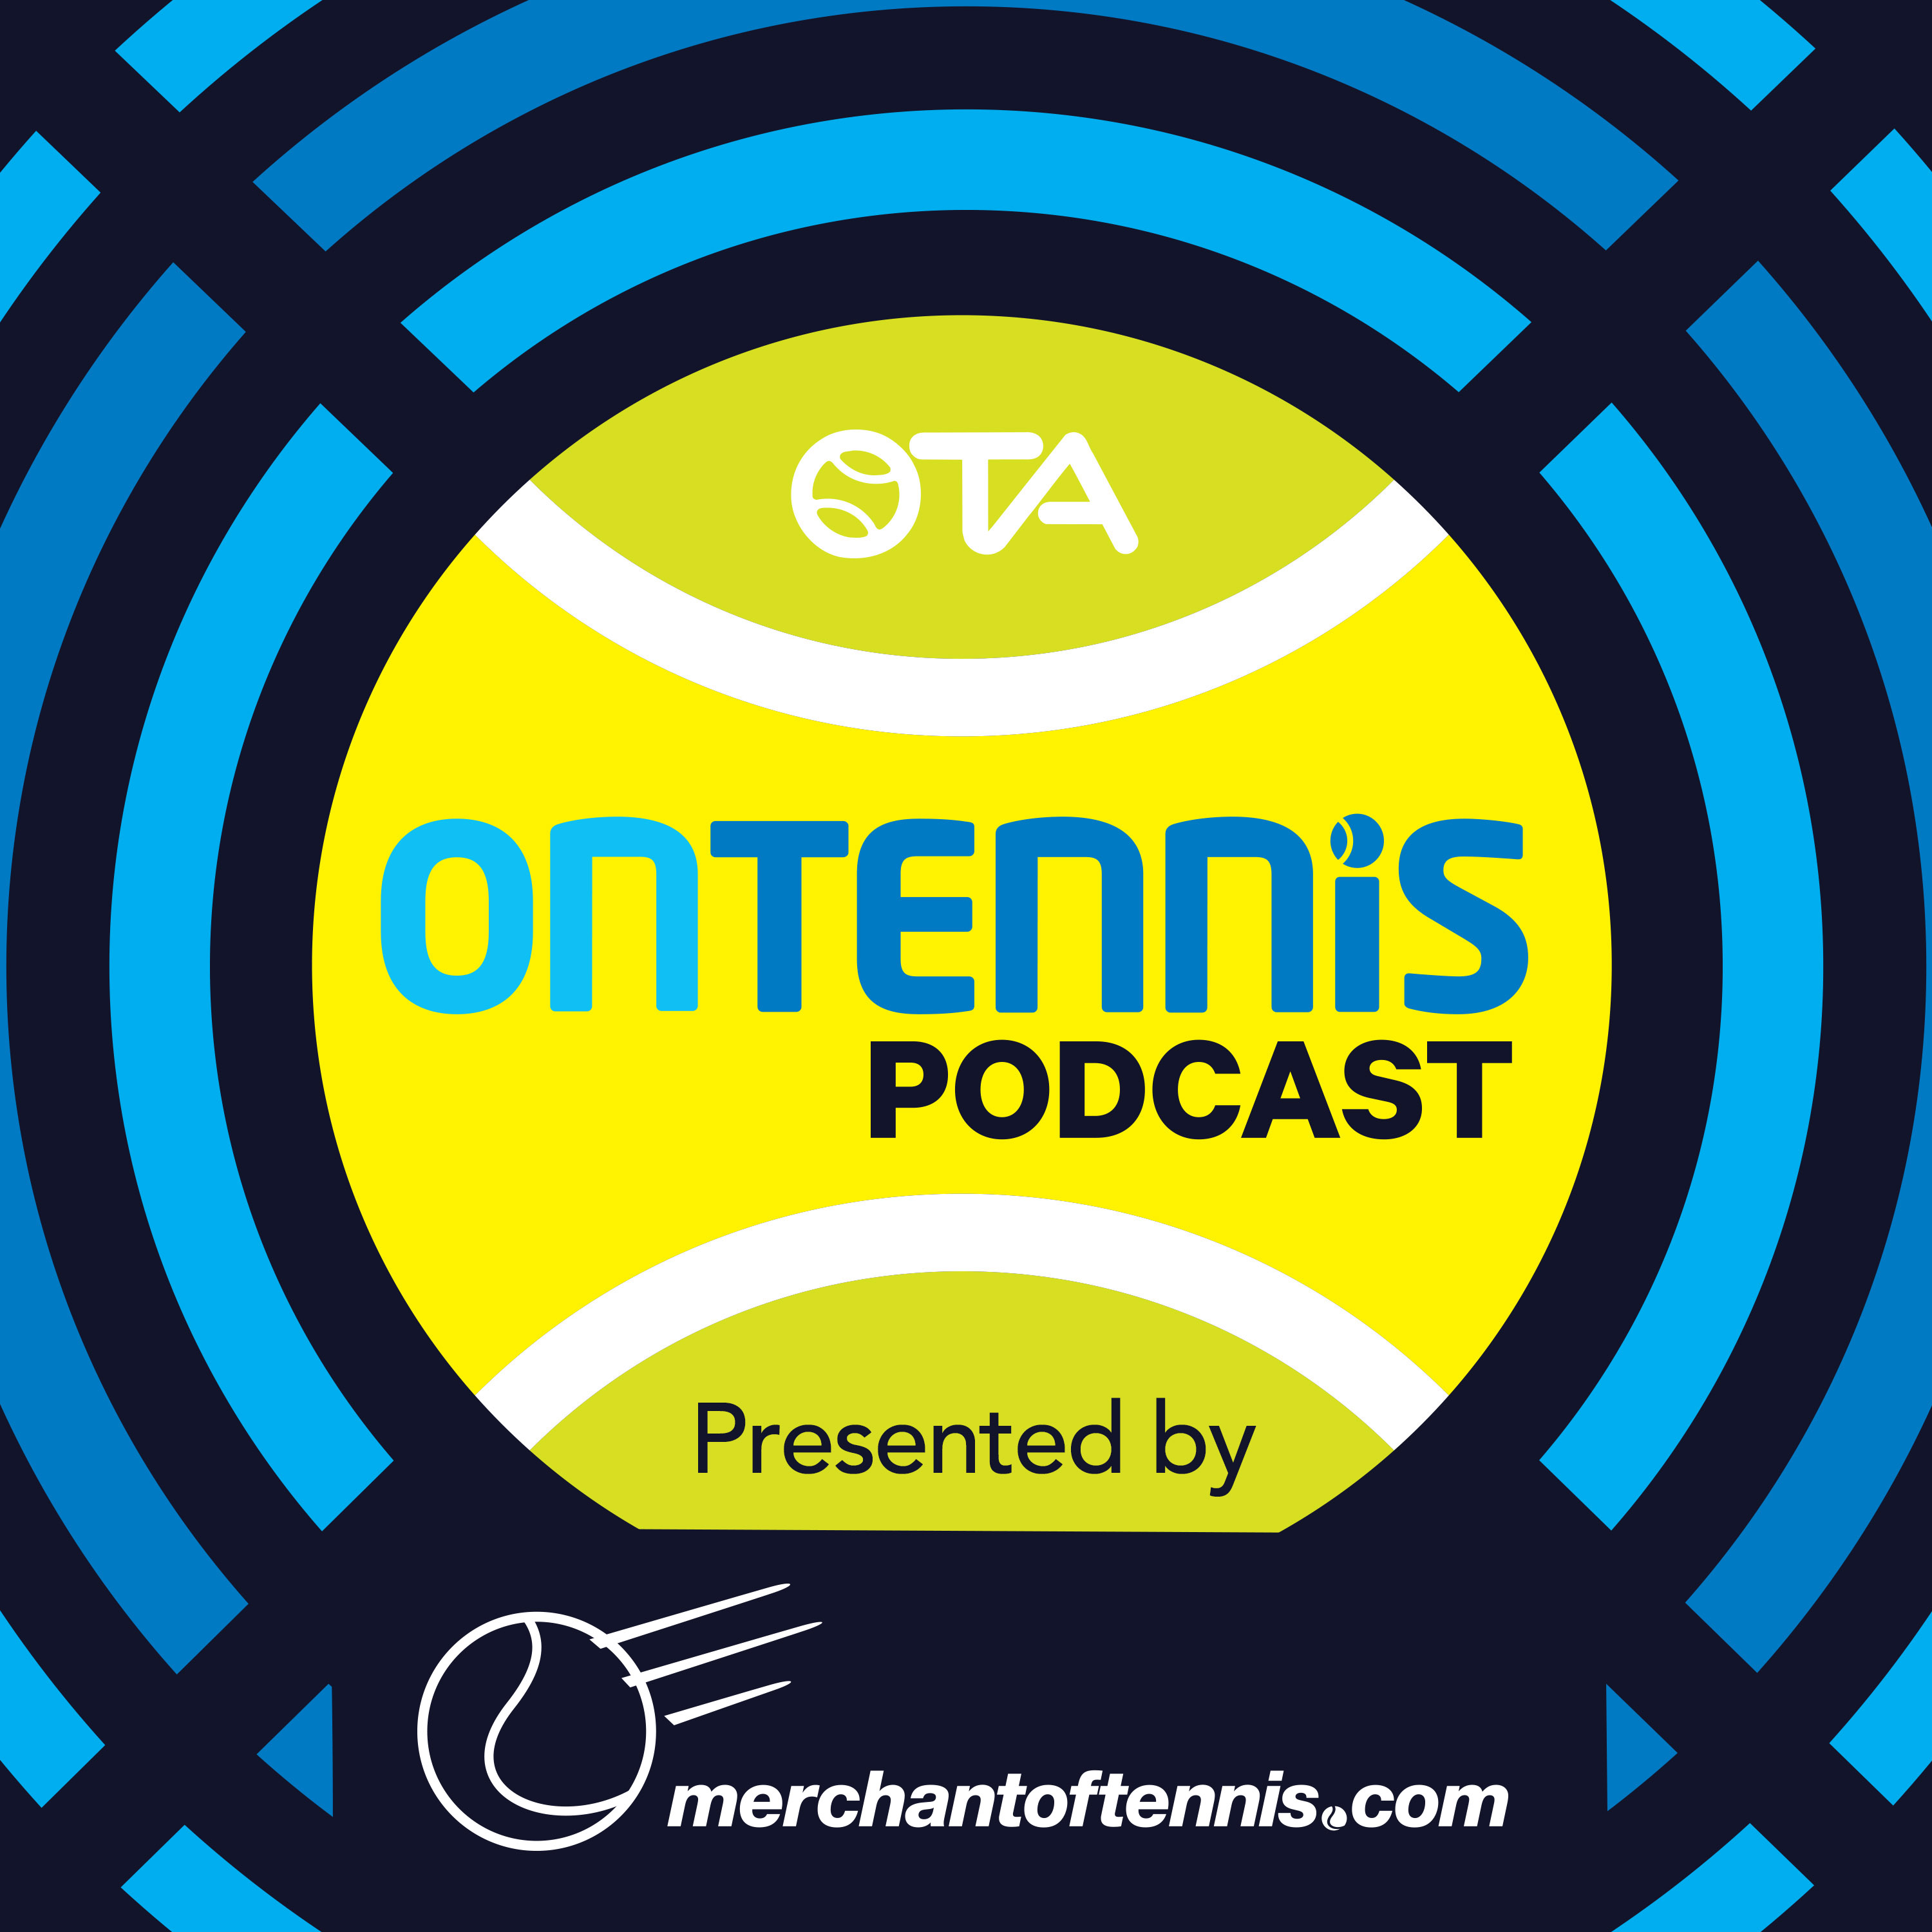 ONTENNIS interview with James Boyce about COVID-19 Guidelines